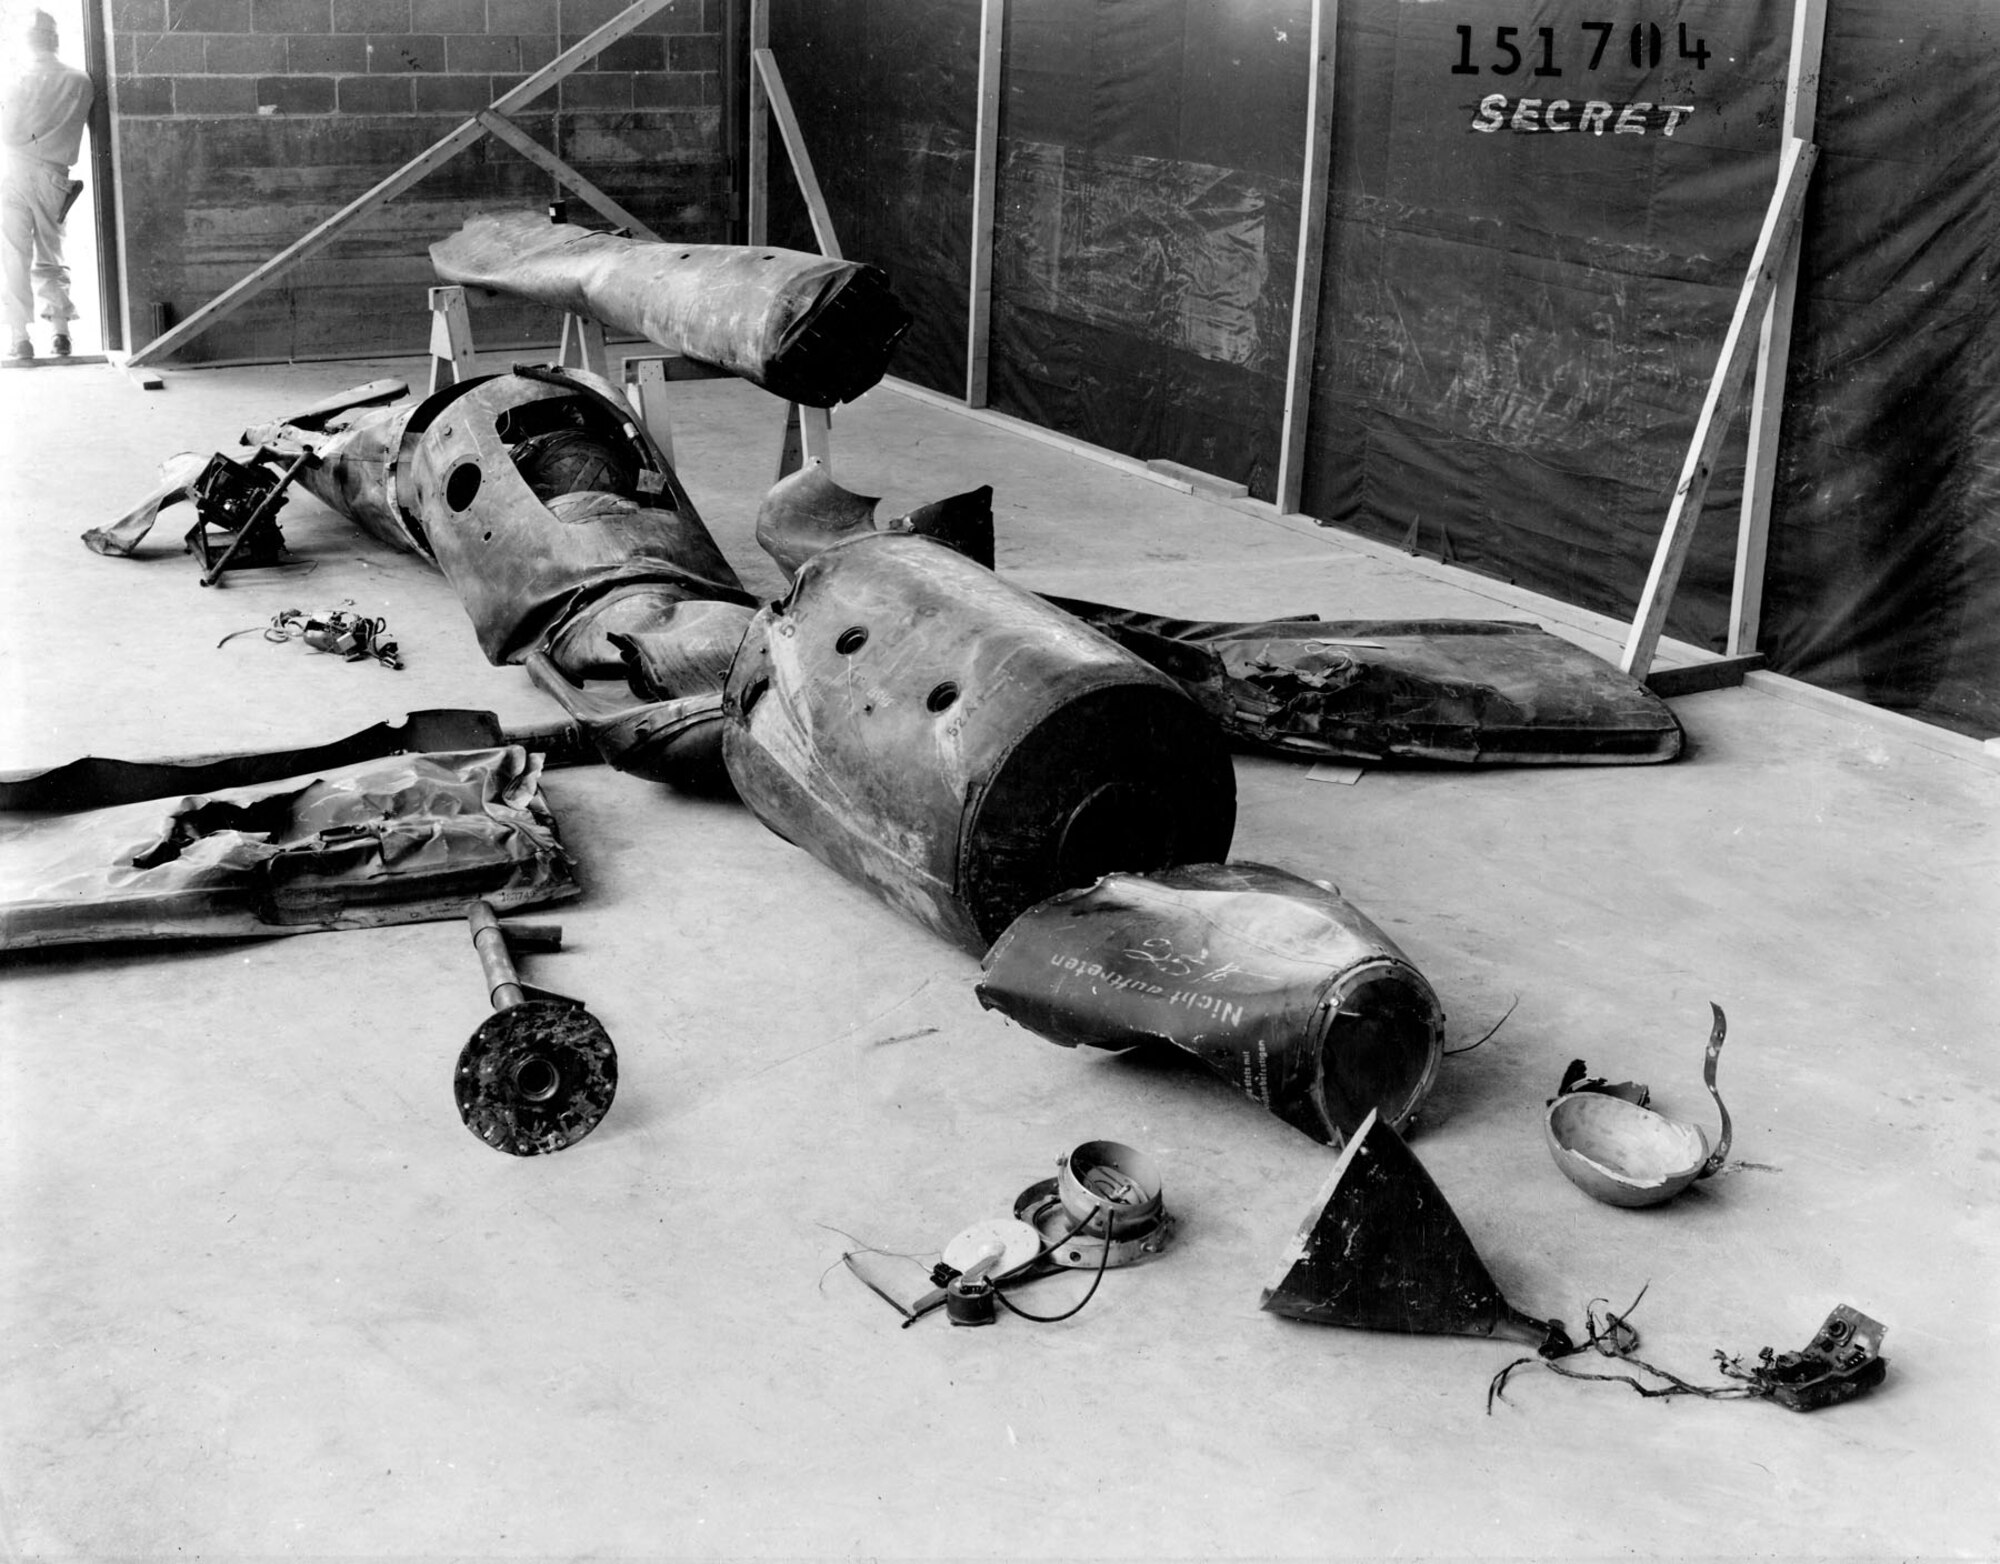 Parts of downed V-1s were assembled and studied closely. Note the armed guard at the upper left and "SECRET" stamp on upper right. (U.S. Air Force photo)